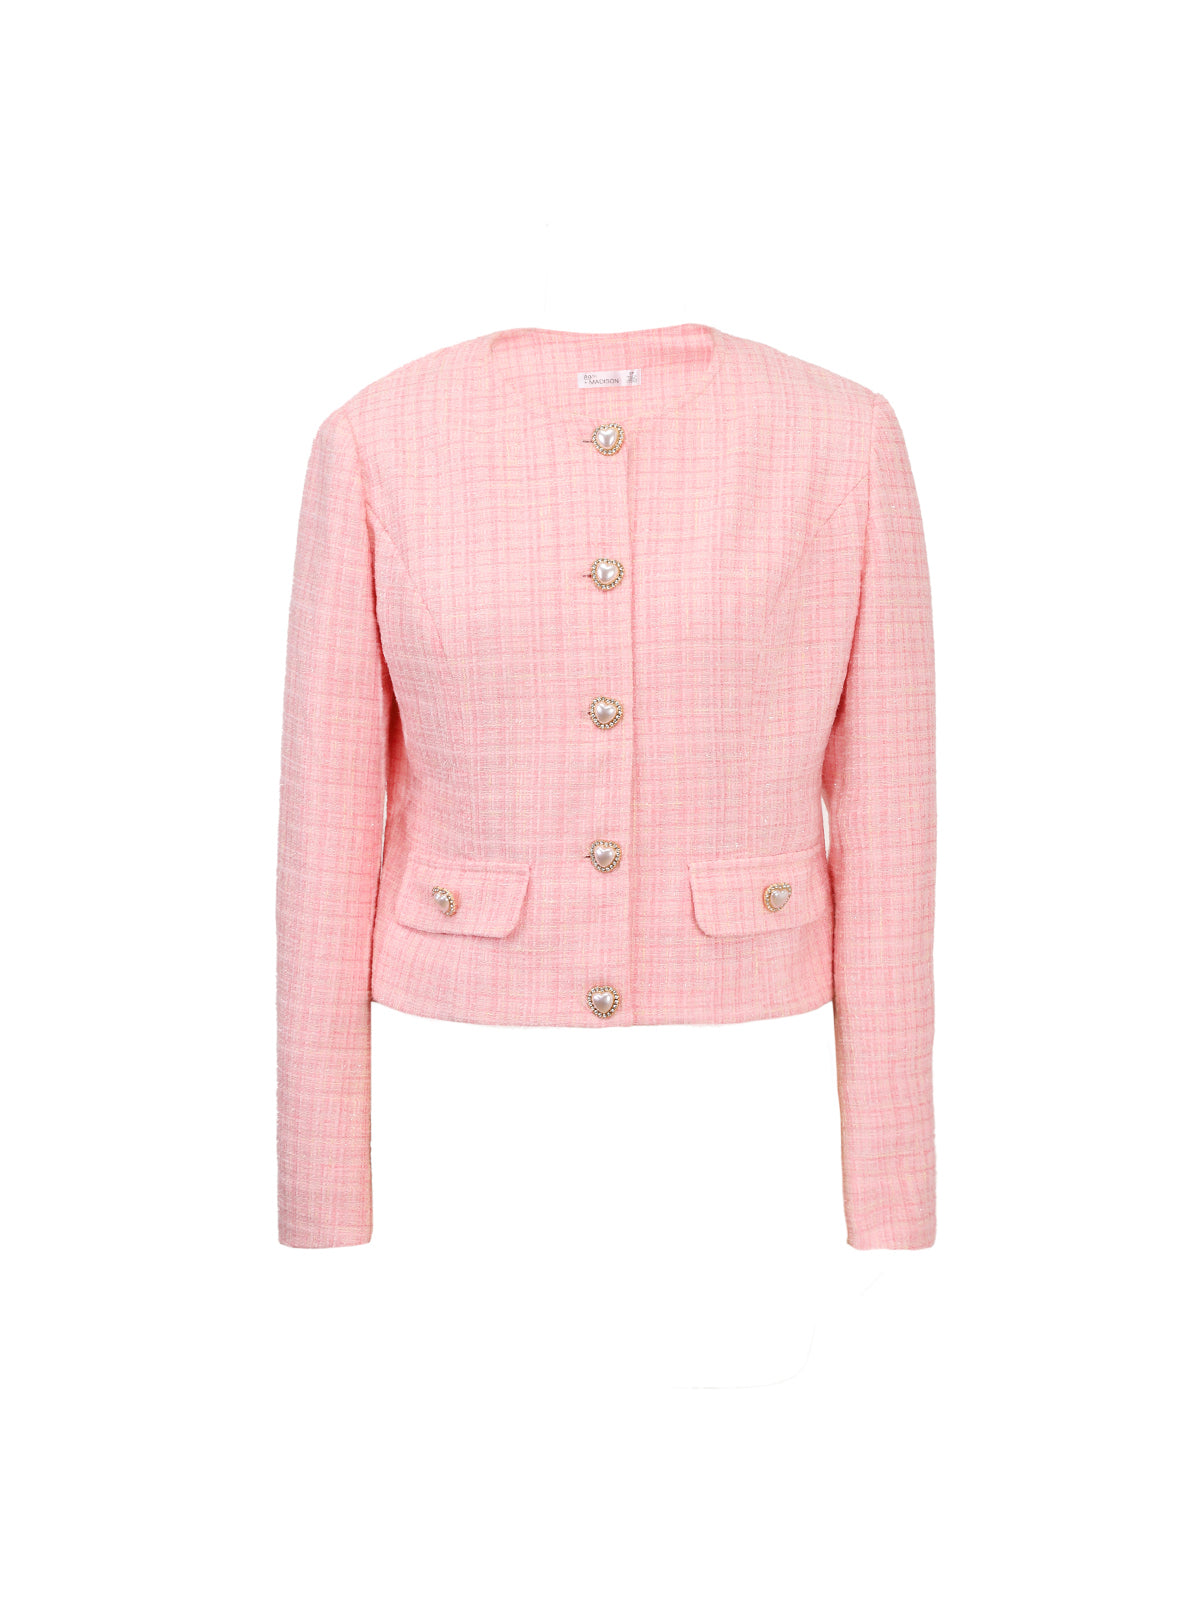 Faux-Pearl Front Buttons Tweed Jacket